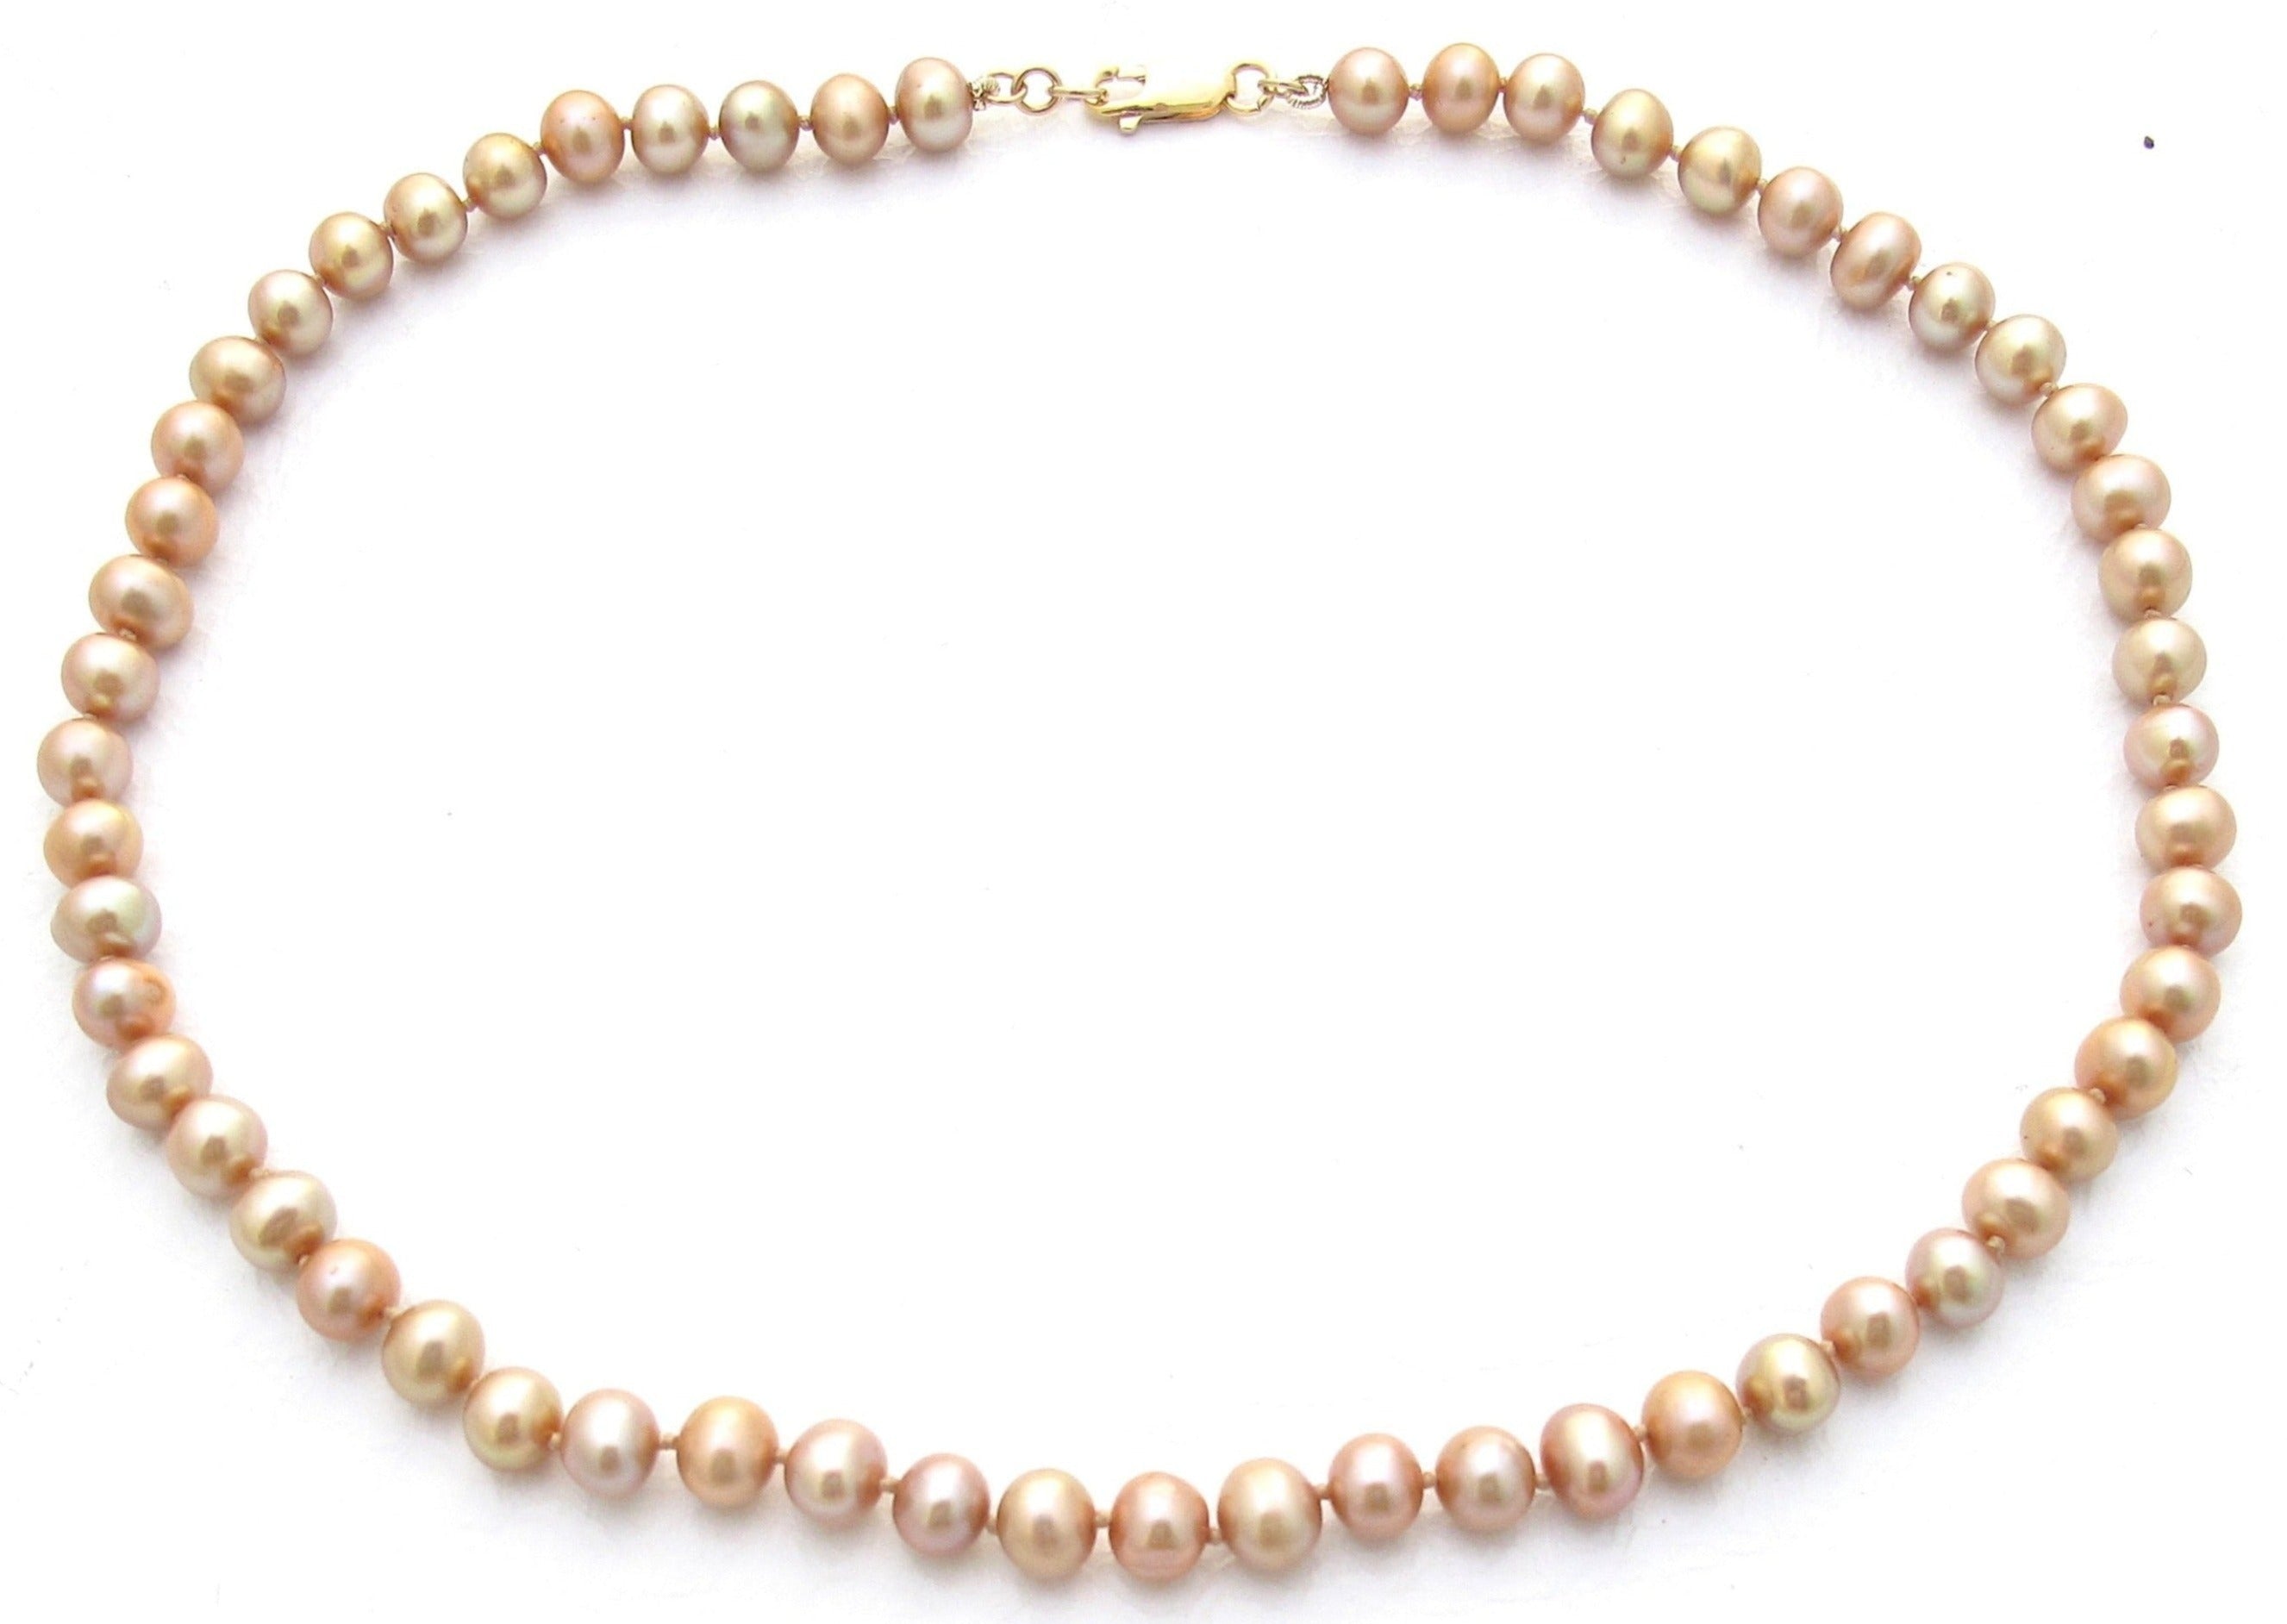 Single Strand Champagne Pearls w/Sterling Clasp - Vintage Renude